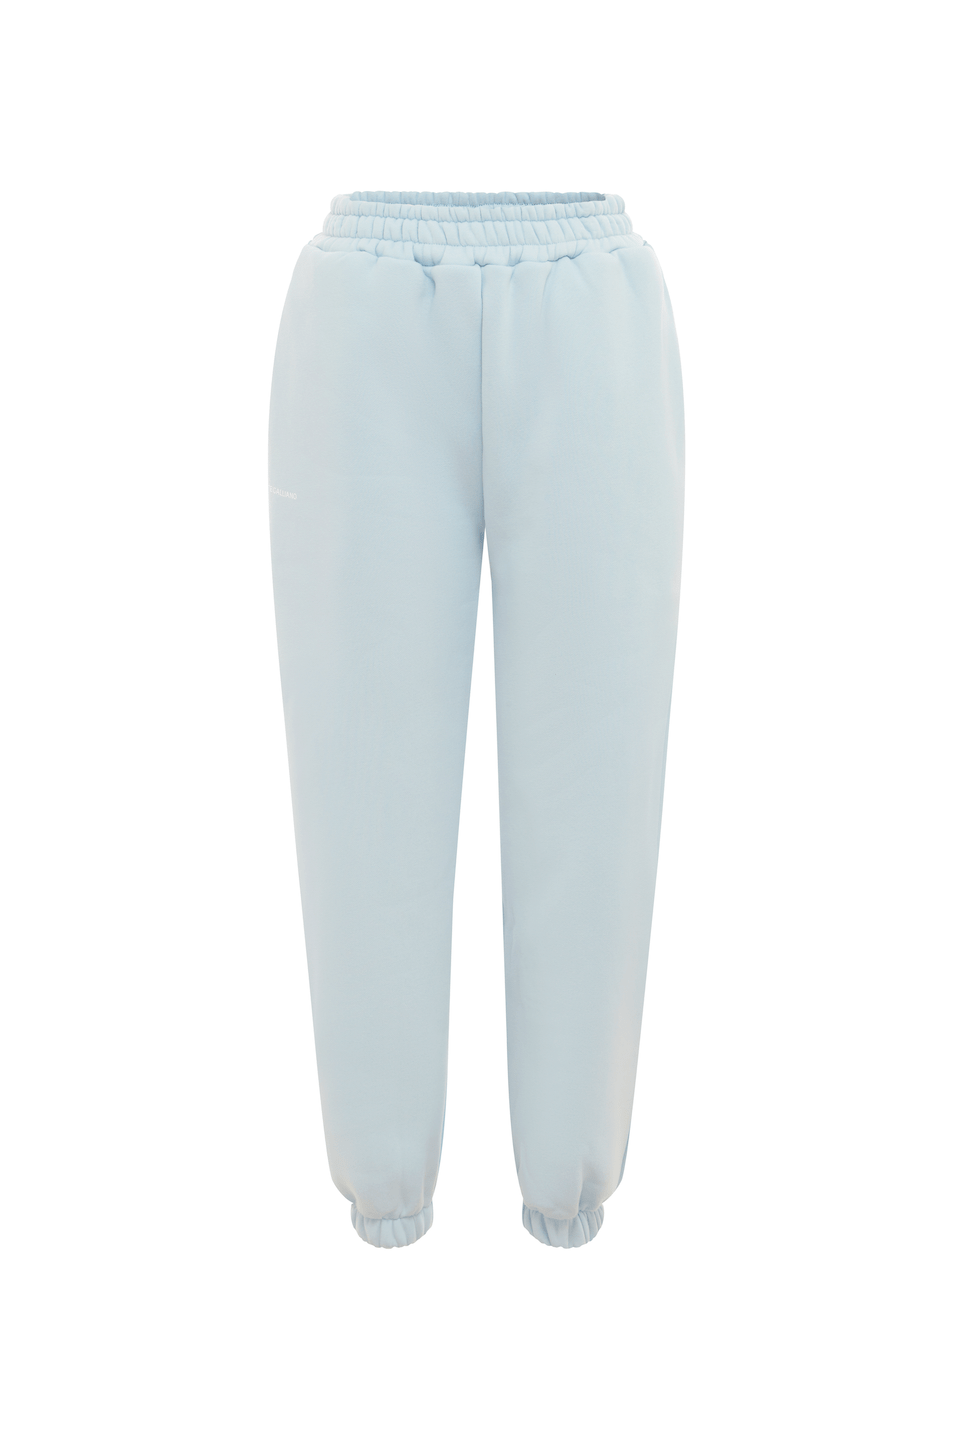 LUXE 23 Tracksuit Pants - Baby Blue | Be Activewear